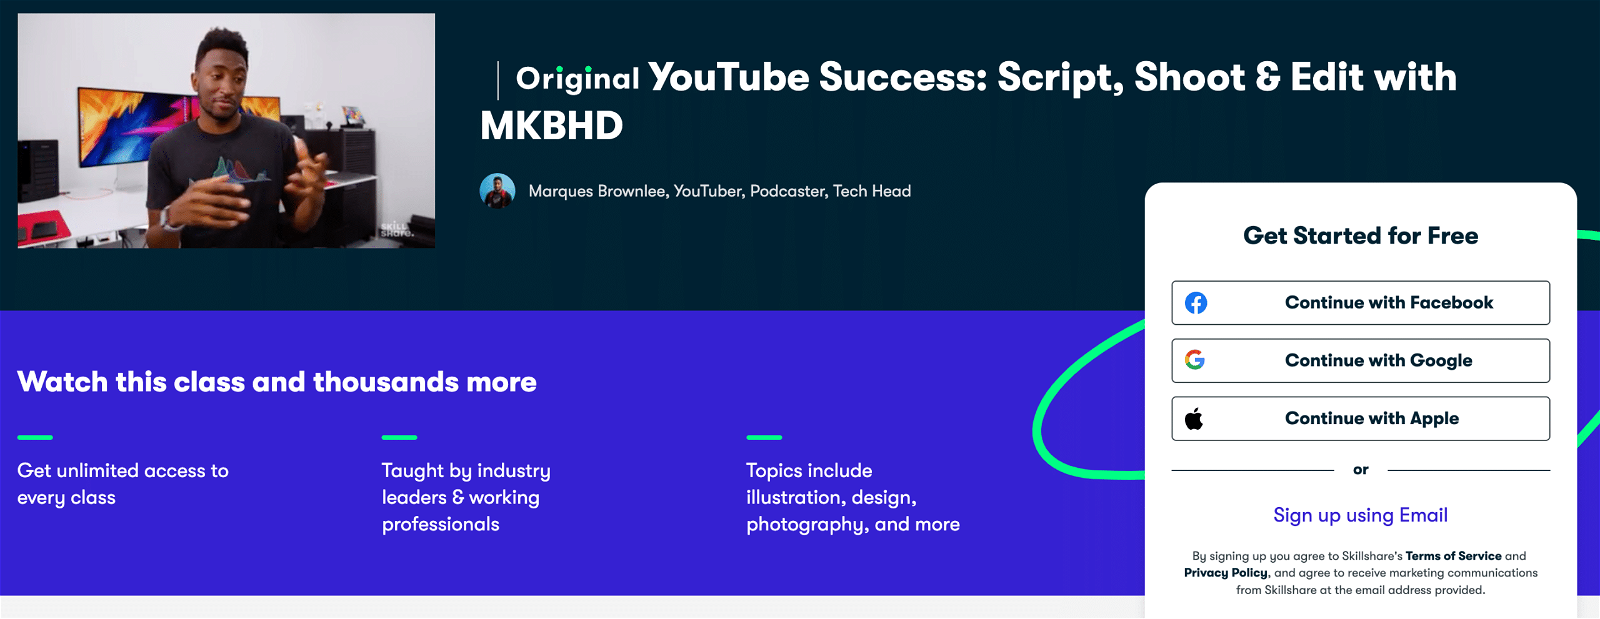 YouTube Success: Script, Shoot, and Edit with MKBHD (Skillshare) Review